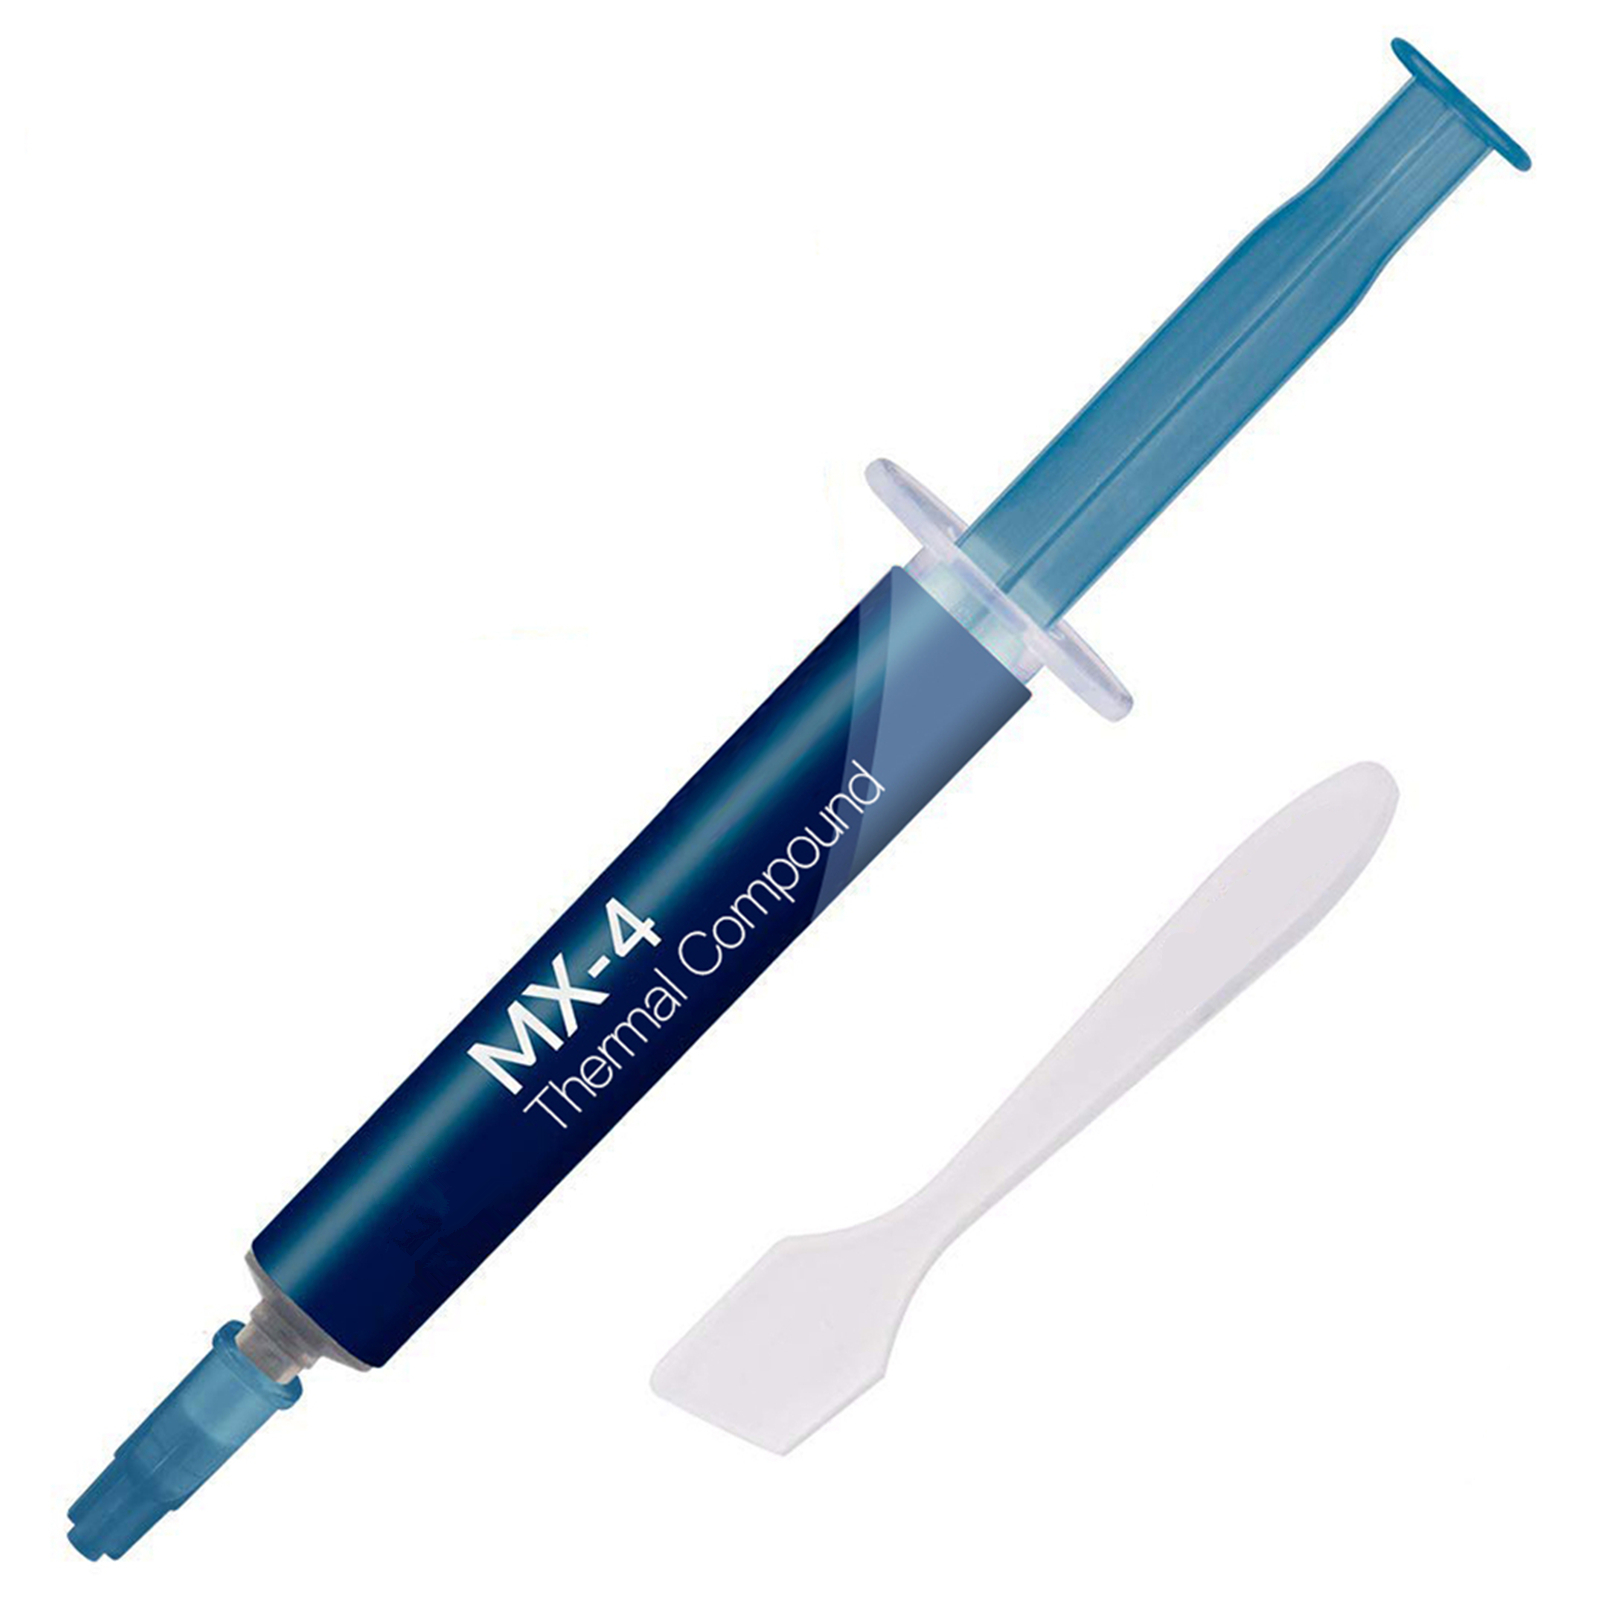 MX-4 Thermal Compound Paste, Carbon Based High Performance, Heatsink Paste, Thermal Compound CPU for All Coolers, Thermal Interface Material - 4 G (with Tool) 